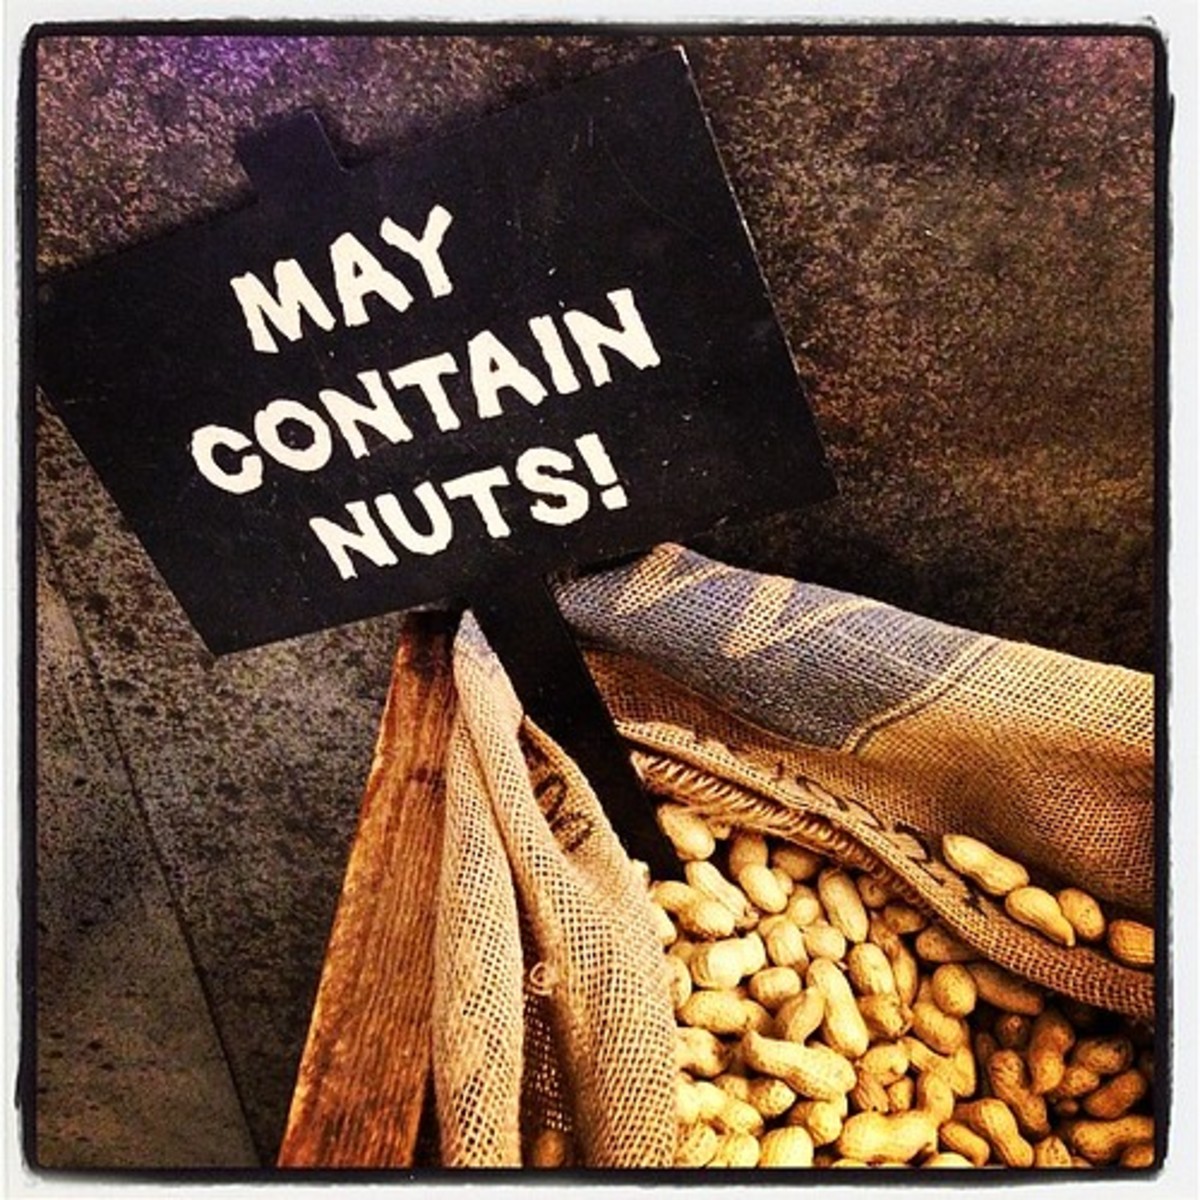 Caution: Nuts may contain nuts.